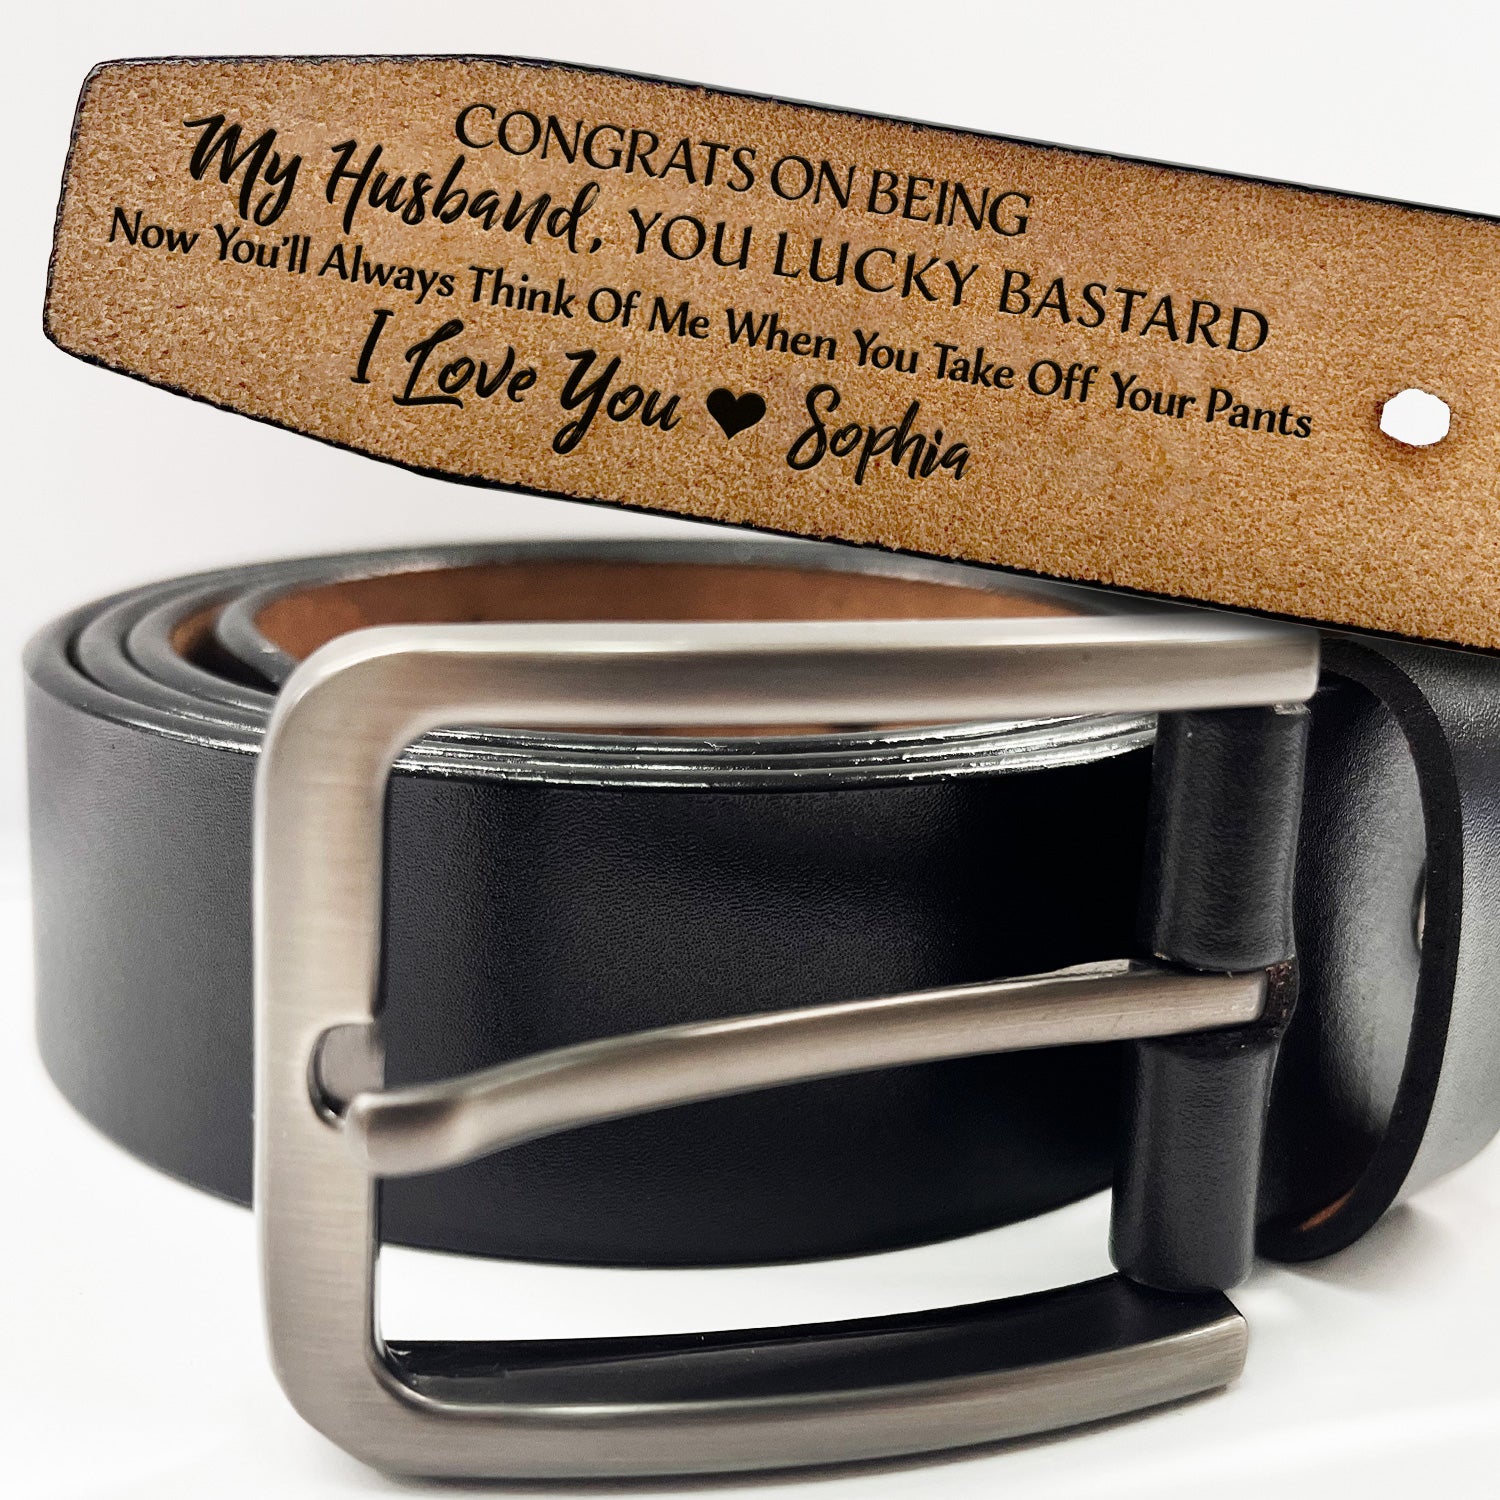 Congrats On Being My Husband You Lucky - Funny Gift For Hubby, Boyfriend, Spouse, Fiance, Dad Gift - Personalized Engraved Leather Belt